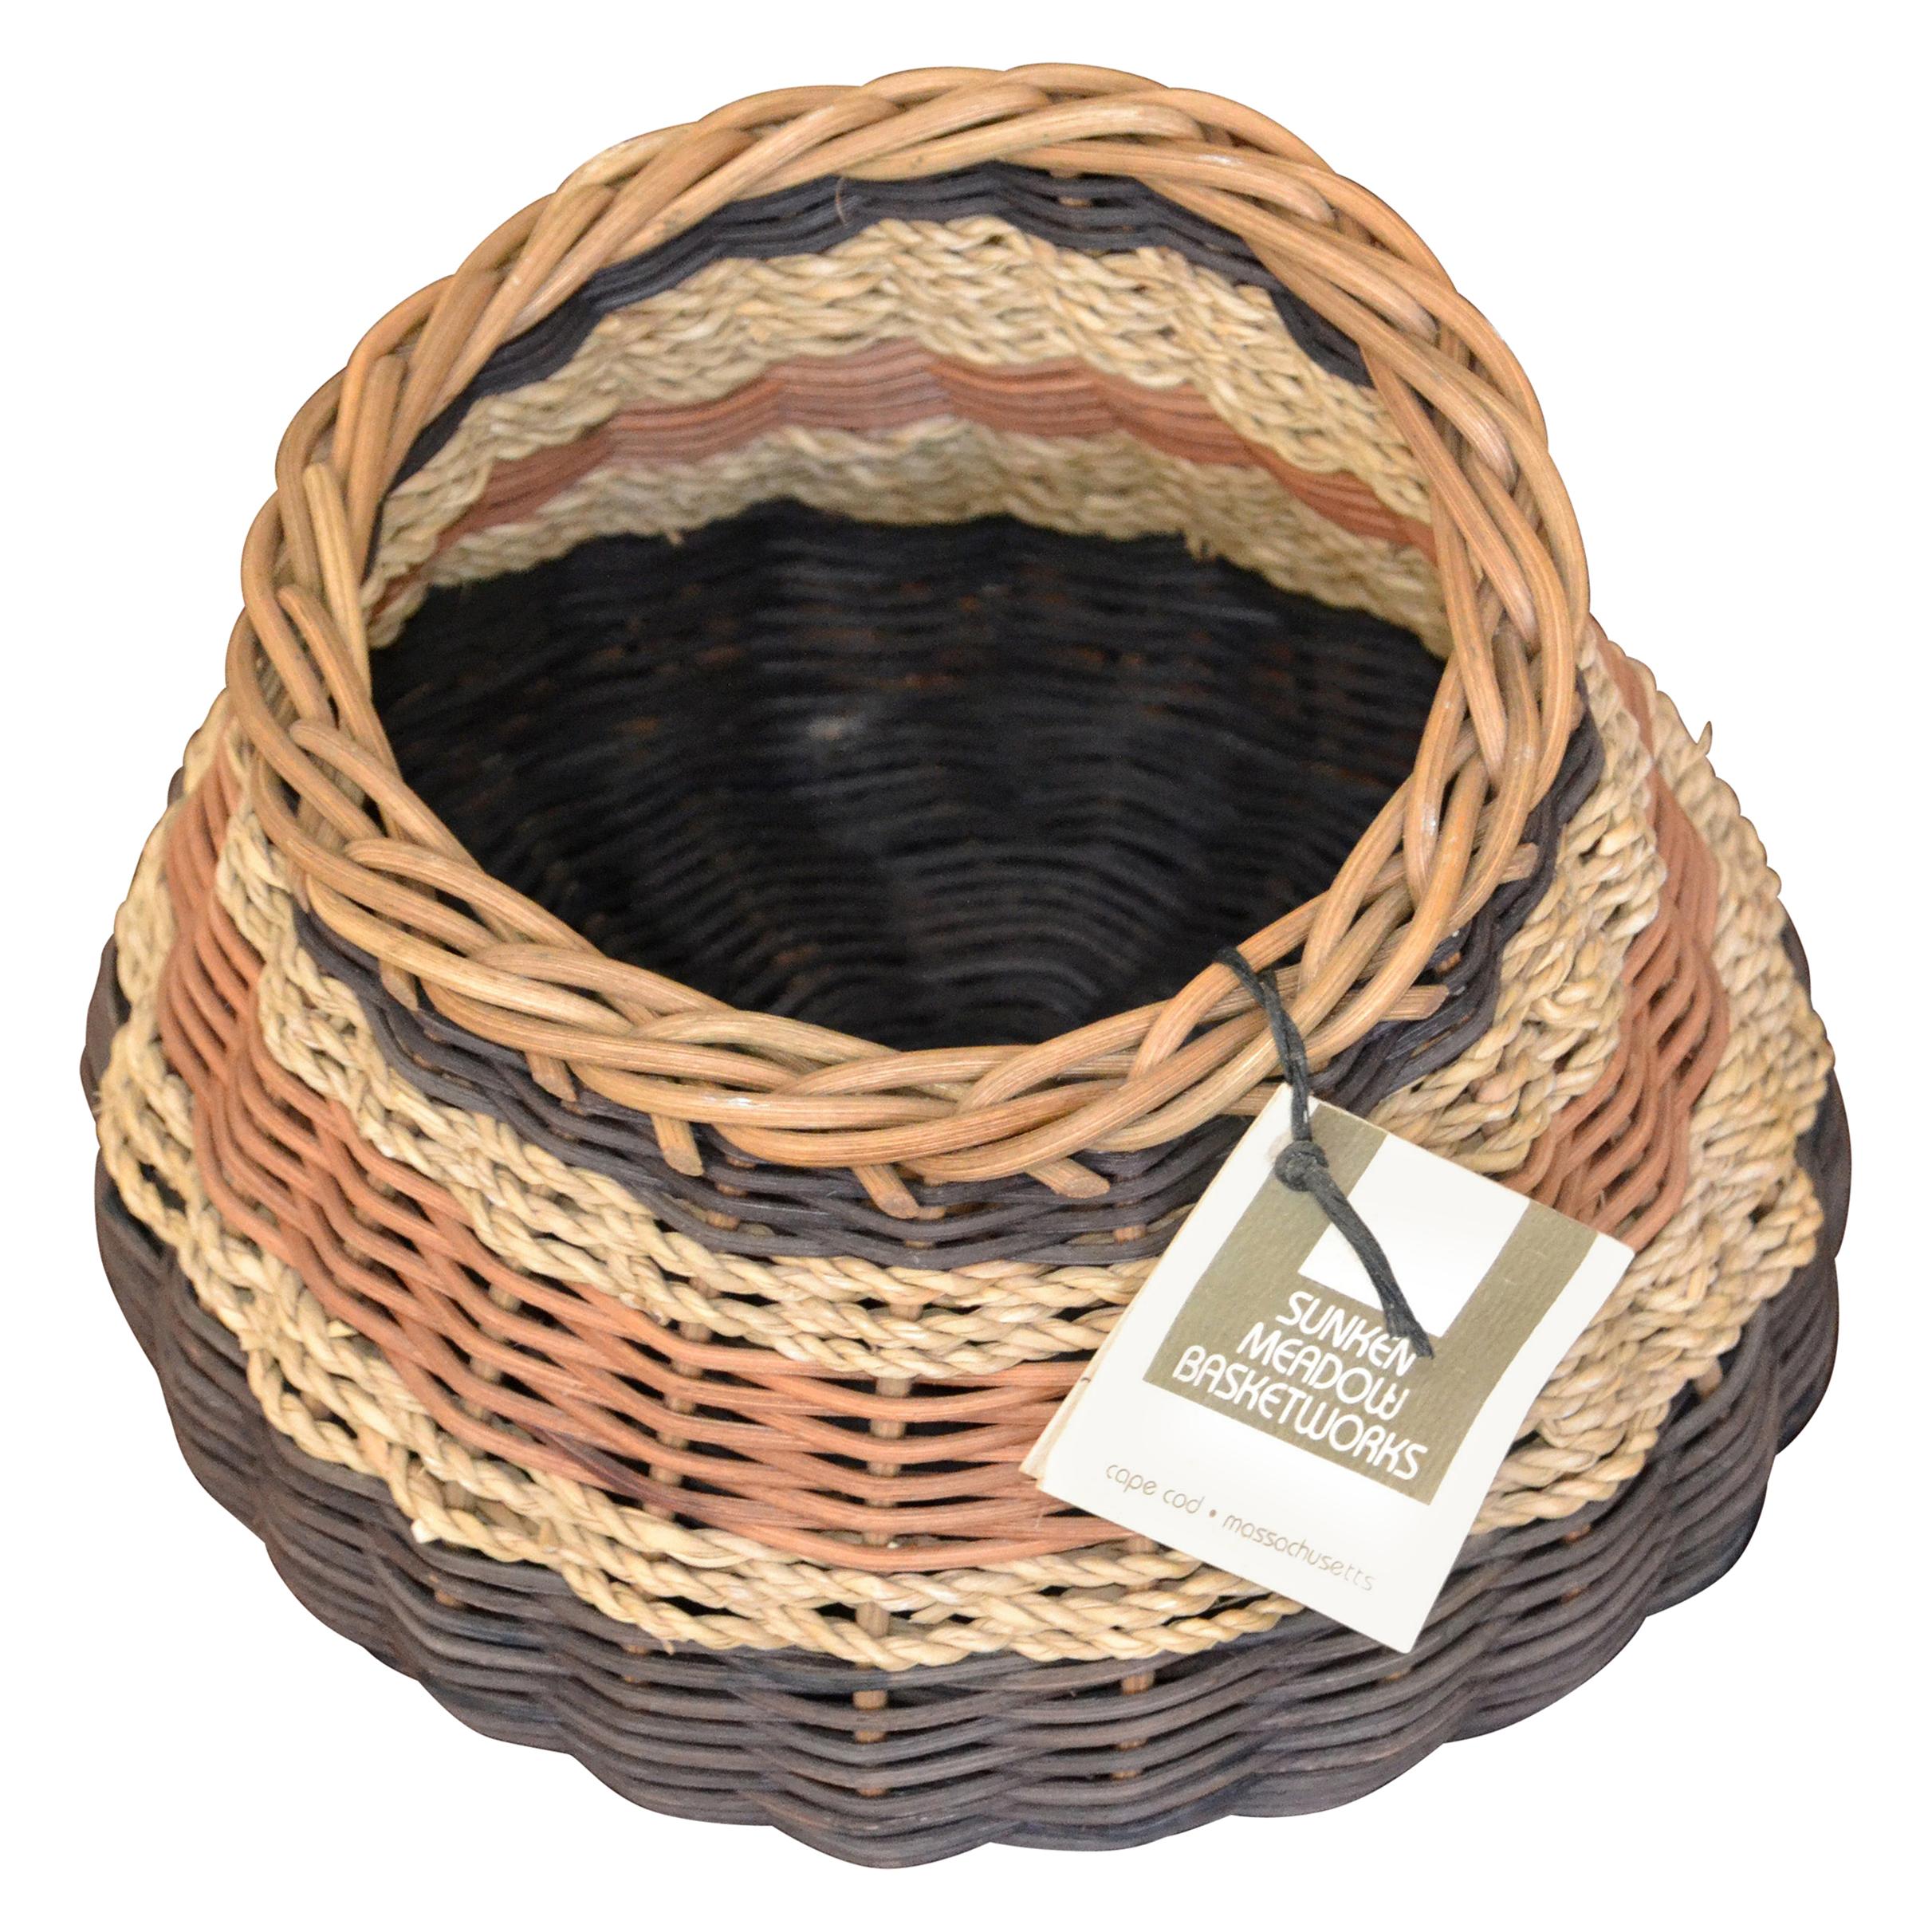 Boho Chic Handcrafted Woven Reed and Seagrass Nancy Basket by Paulette Lenney 